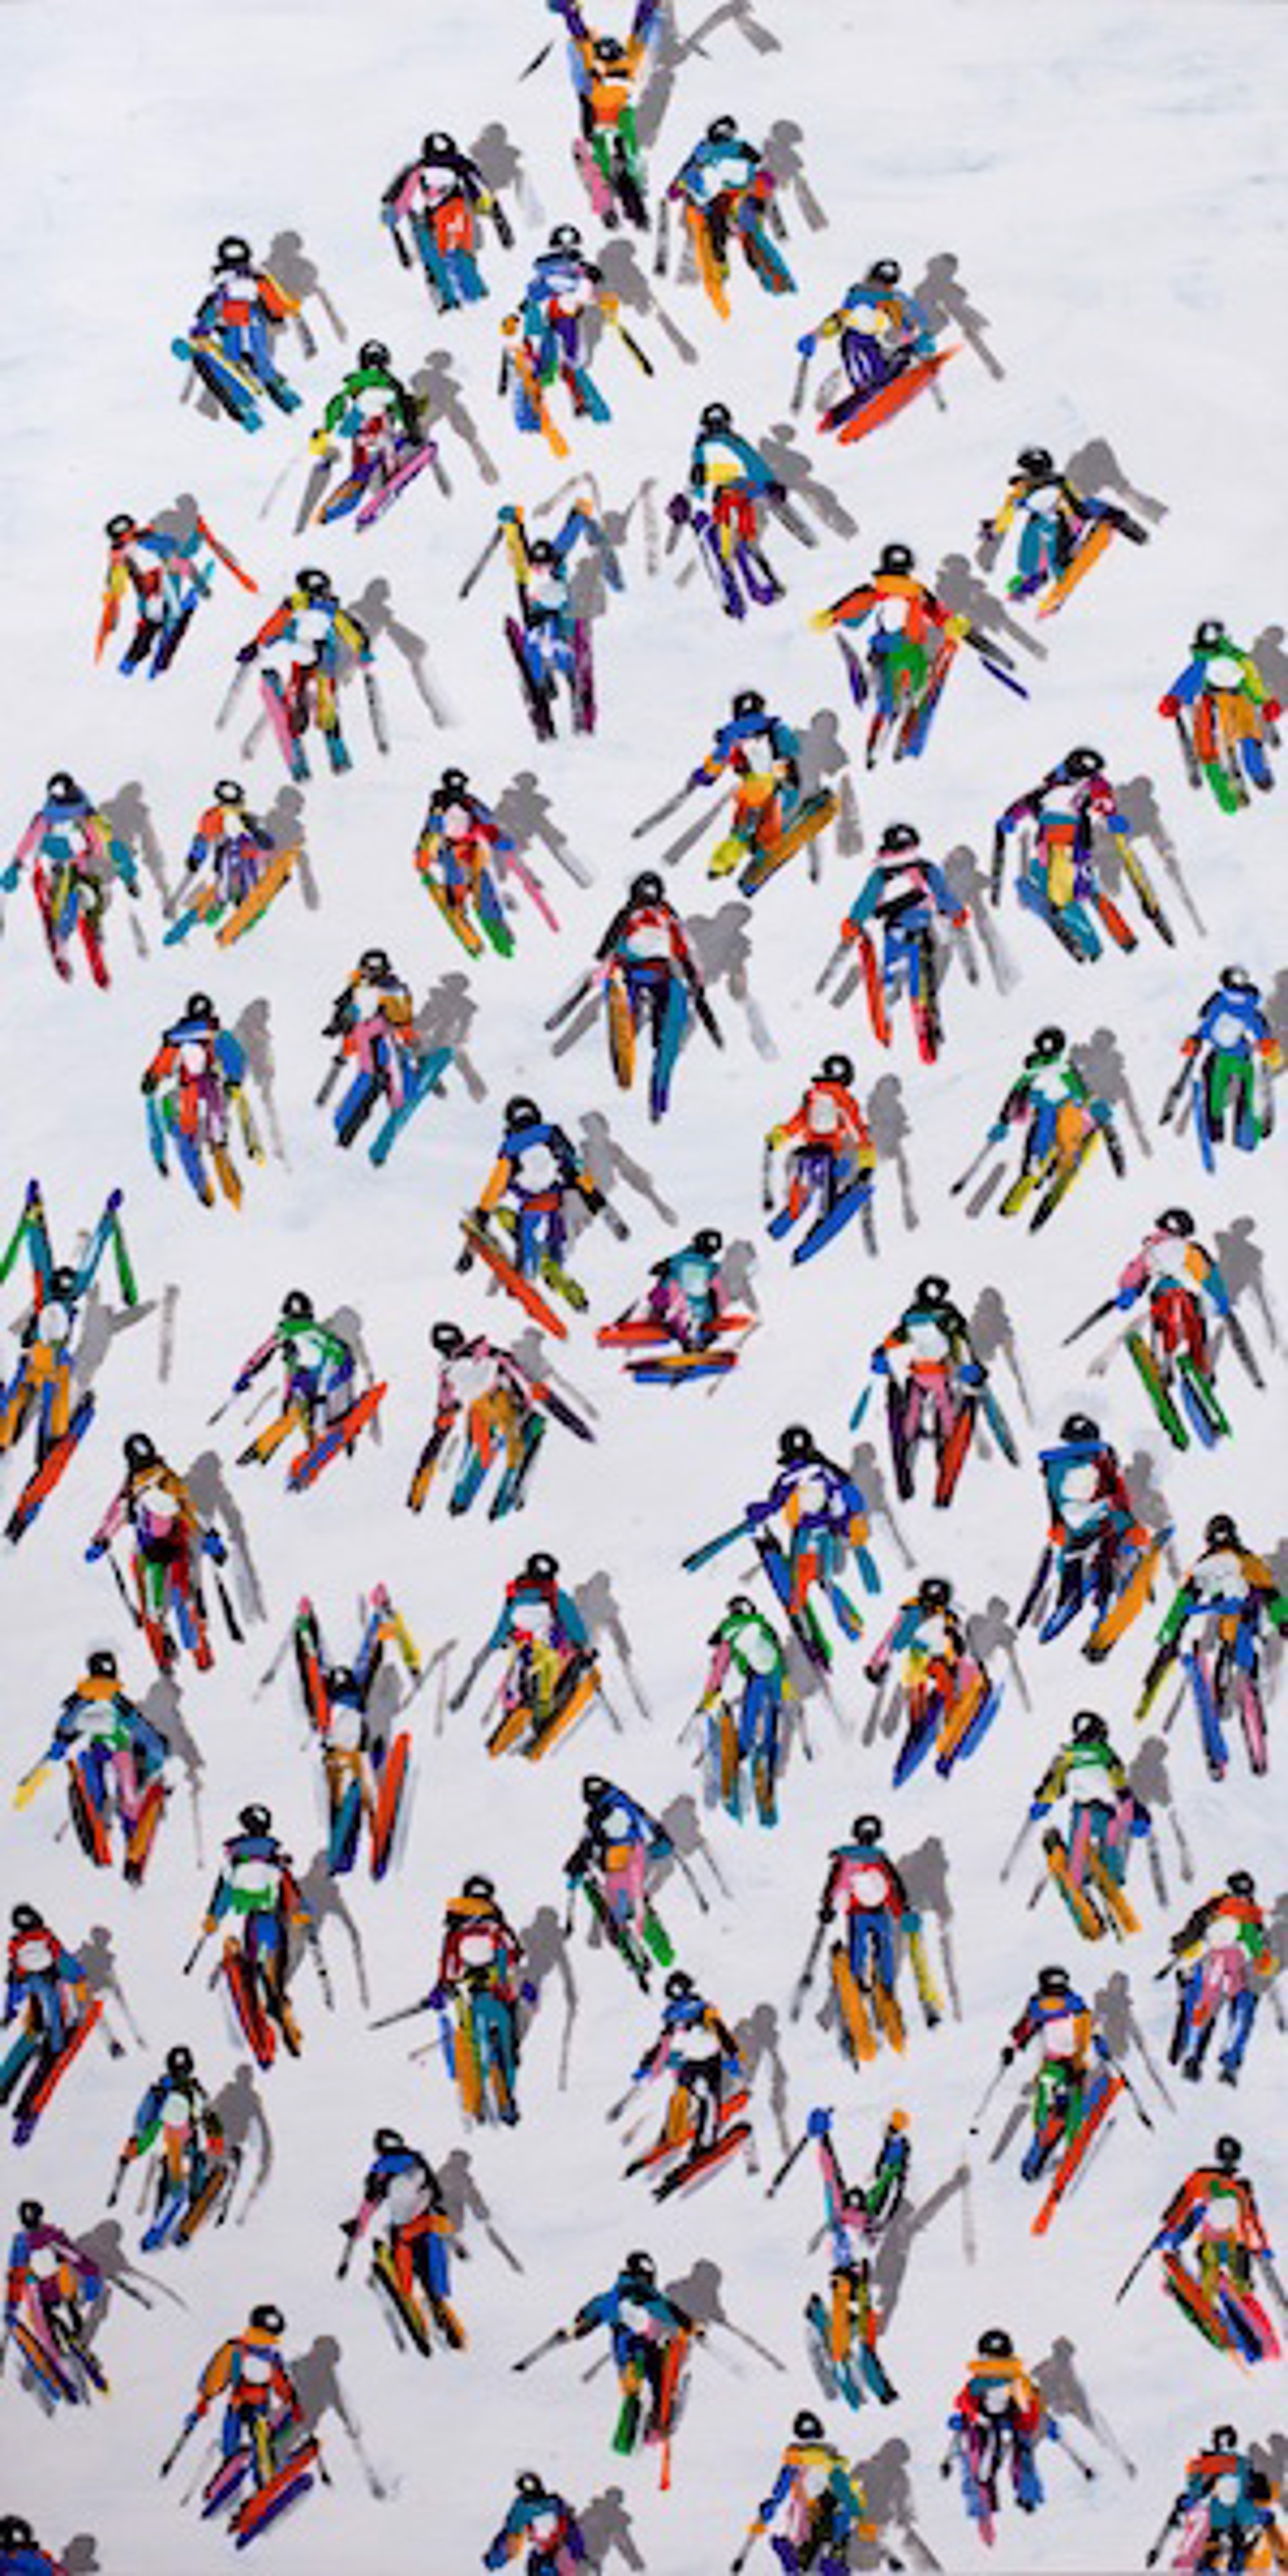 Colorful Uphill Skiers #334 by Heather Blanton